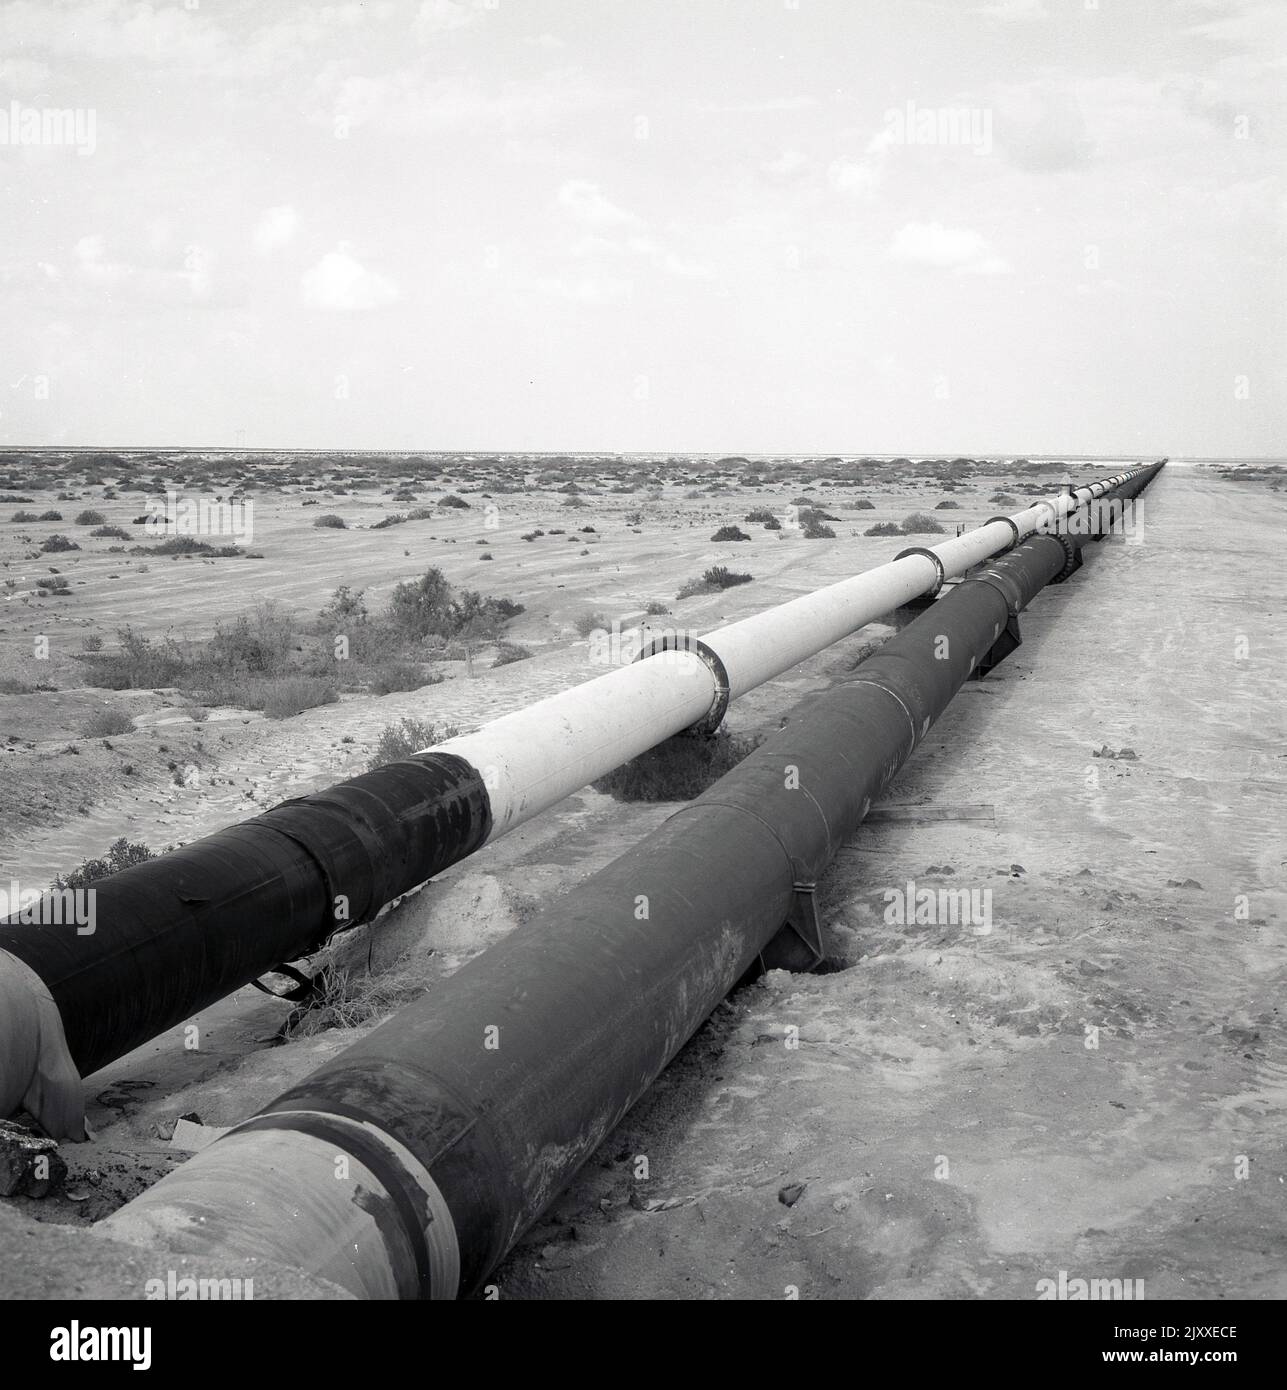 1960s, historical picture showing two crude oil pipelines beside each other, extending across a large barren desert area, Saudi Arabia. Stock Photo